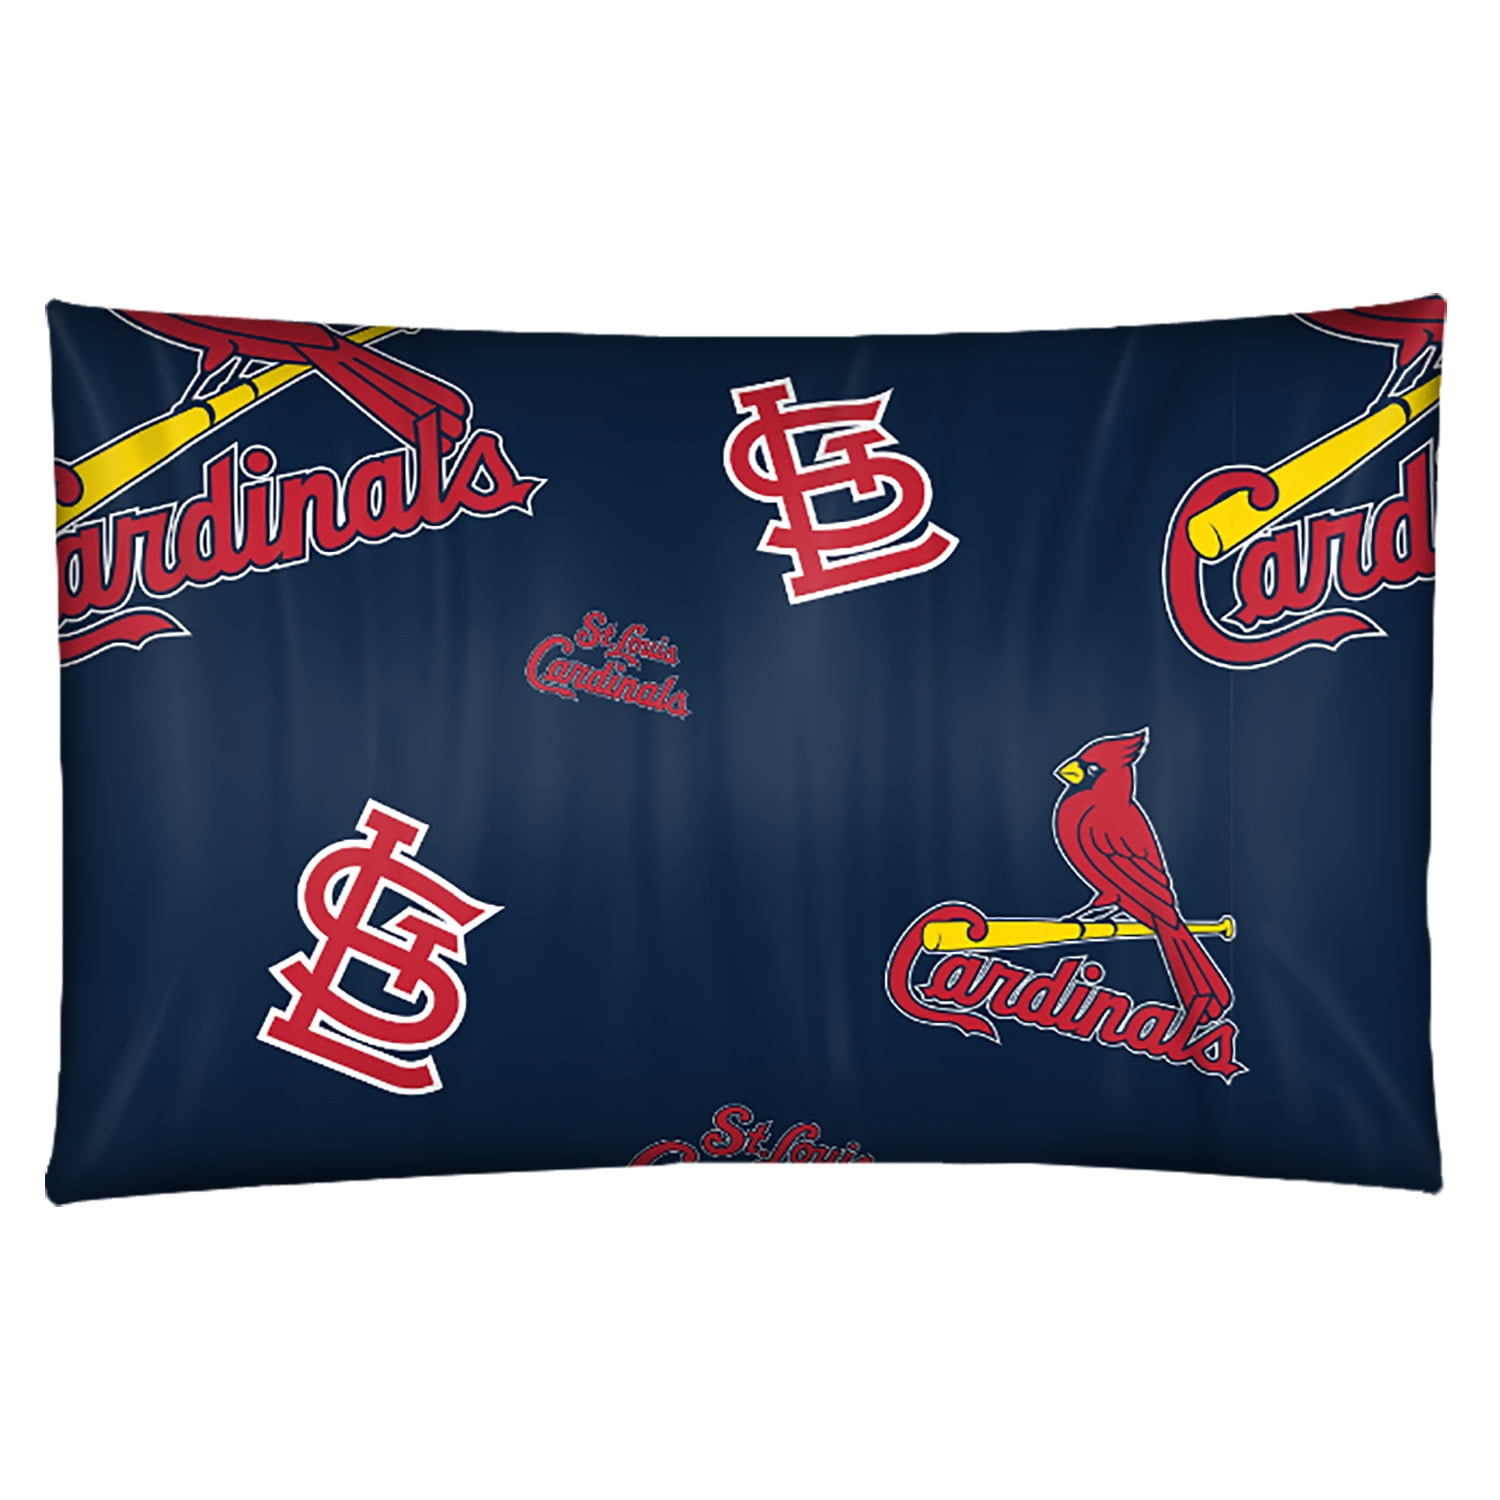  Northwest NCAA Louisville Cardinals Twin Bed in a Bag with  Applique Comforter : Sports Fan Bed In A Bag : Sports & Outdoors